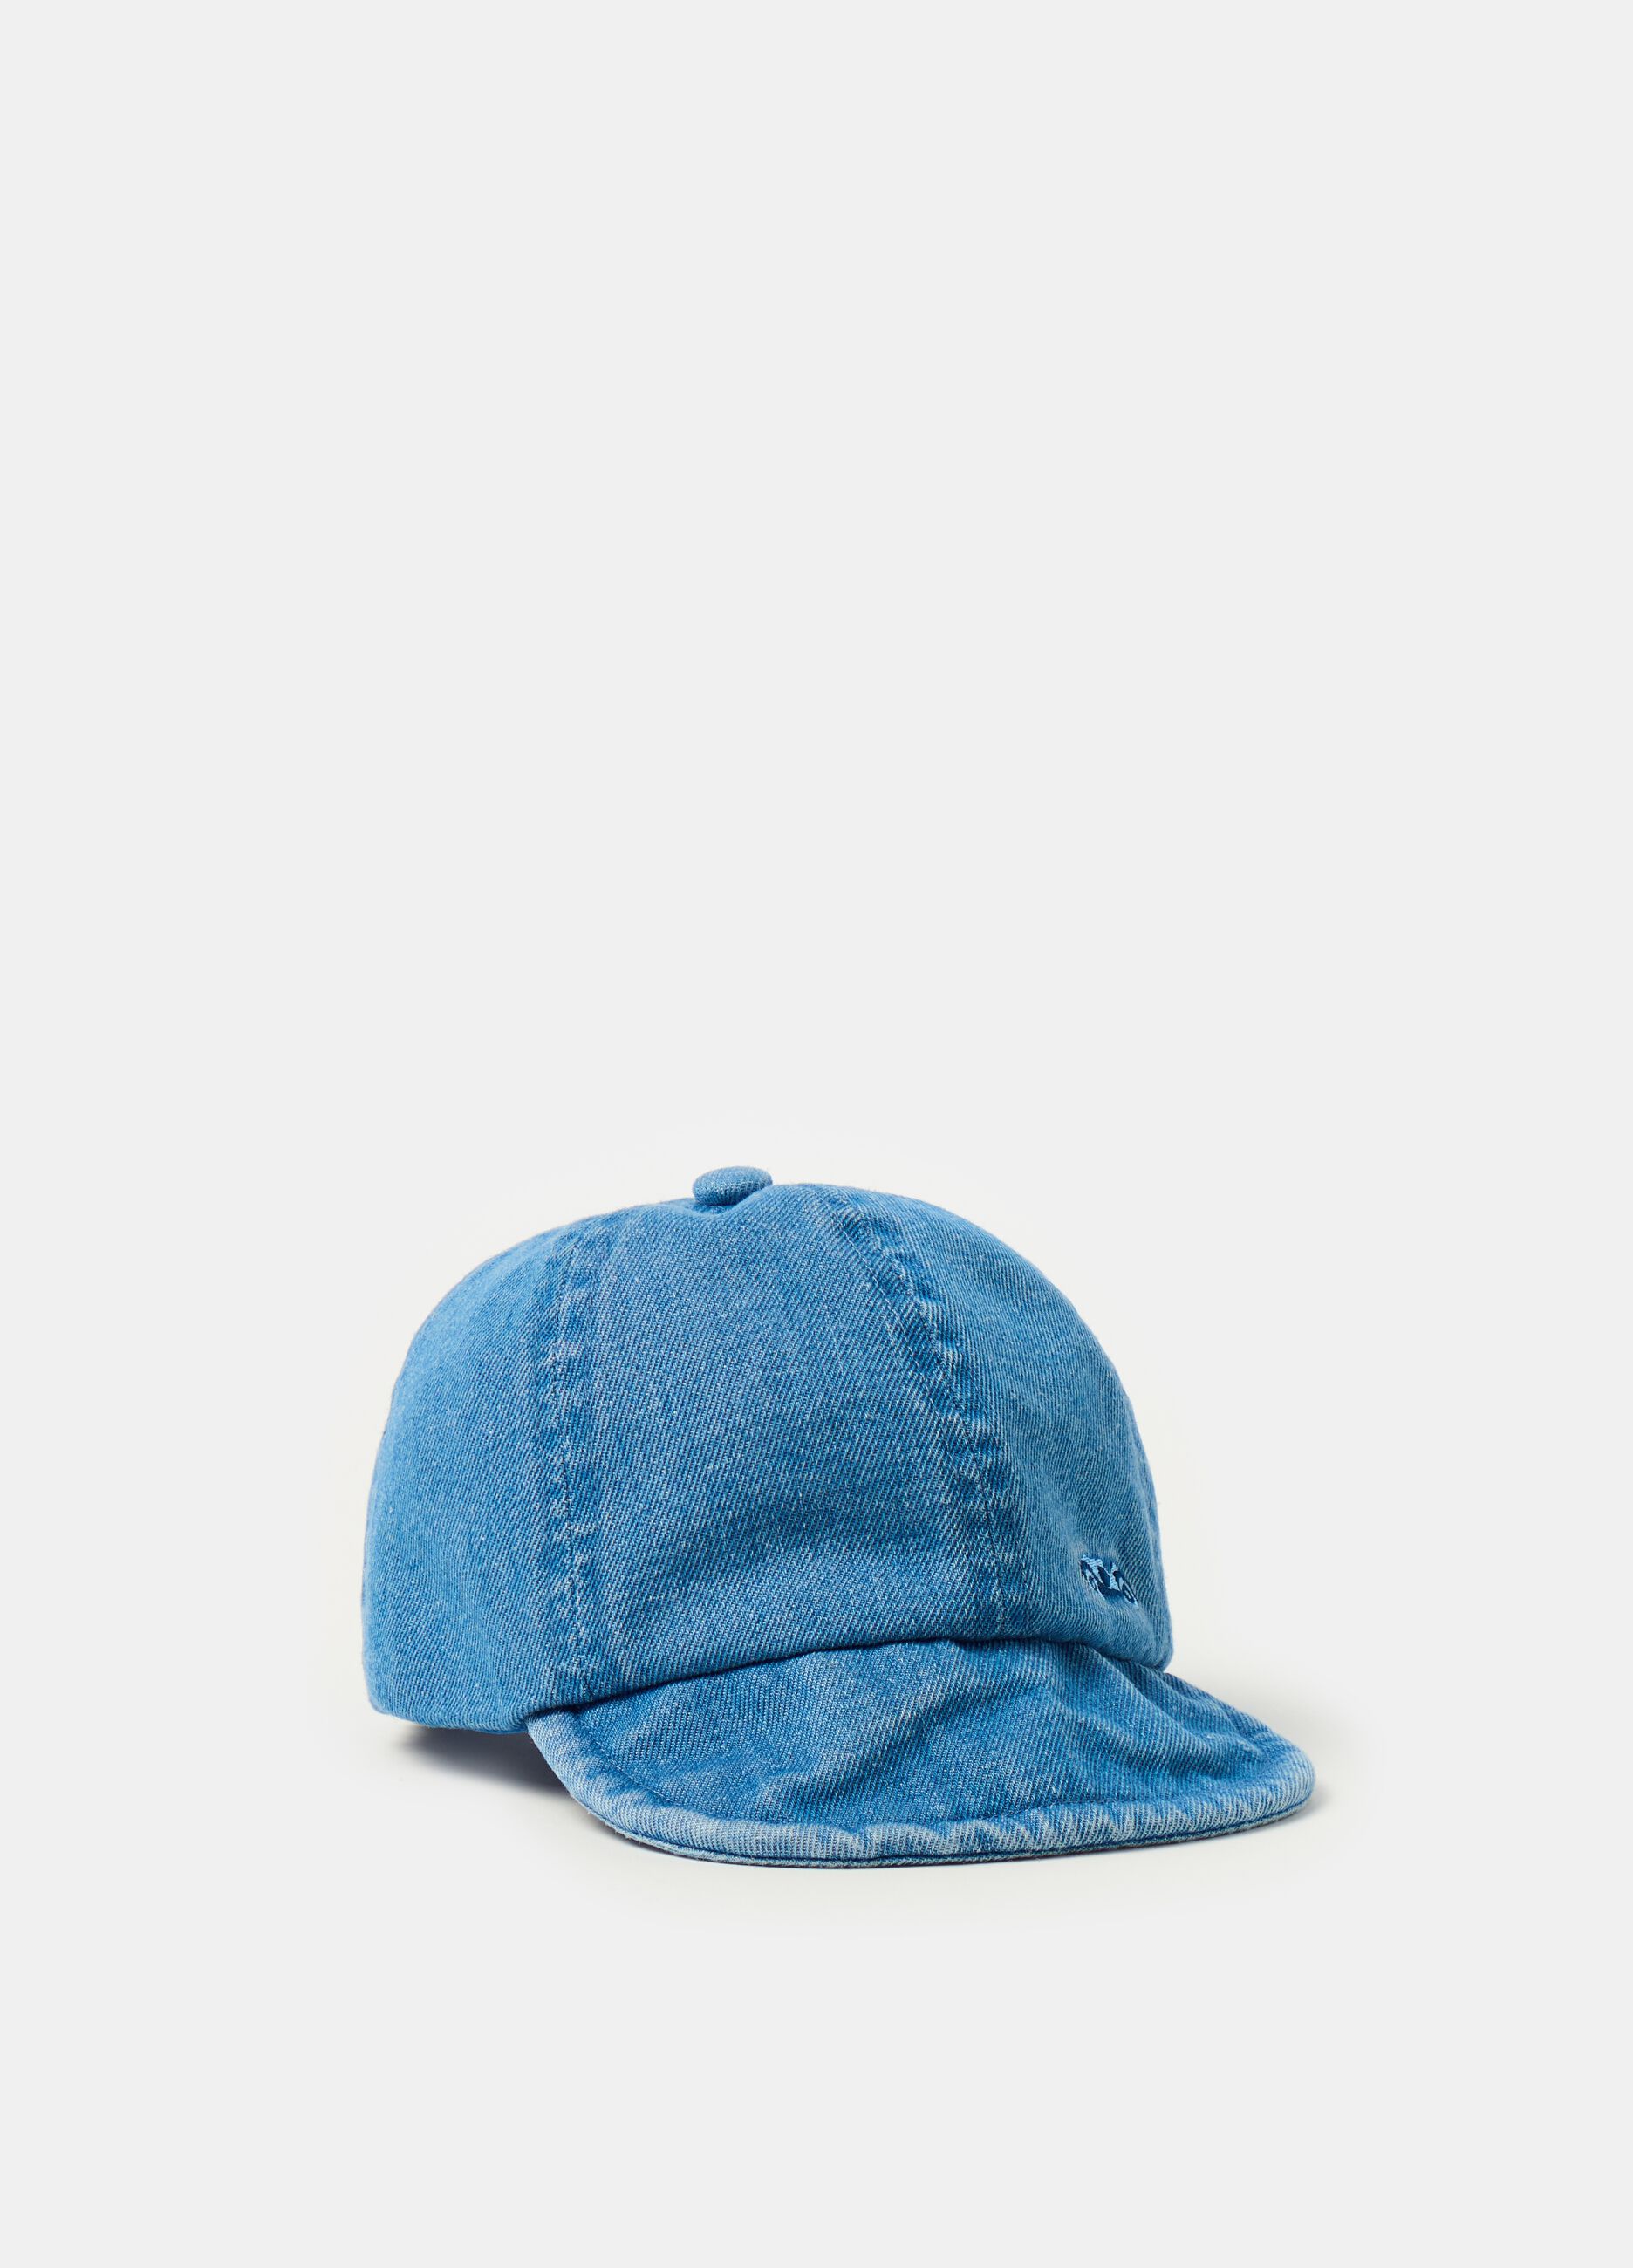 Denim baseball cap with embroidery